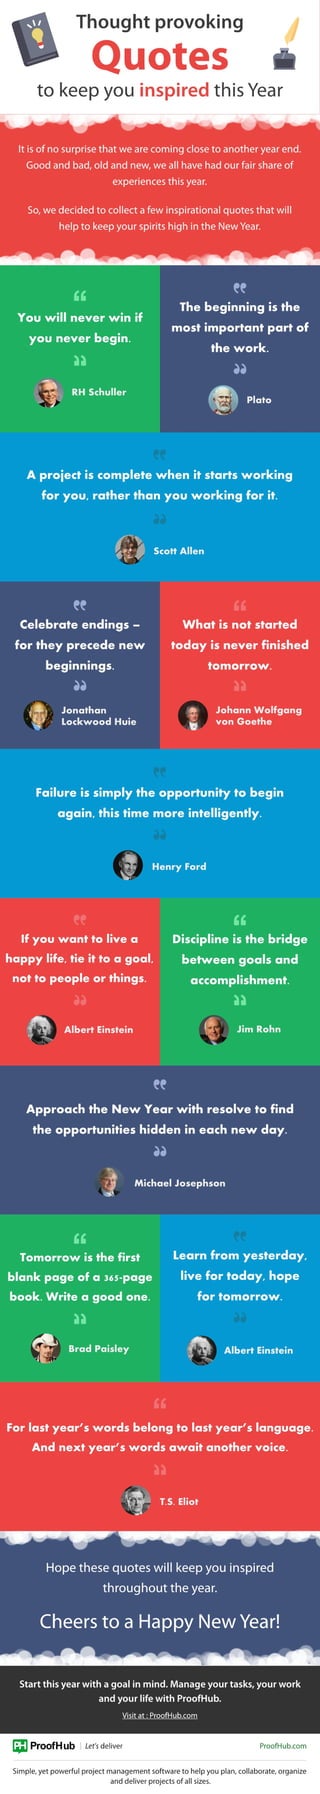 Thought provoking quotes to keep you inspired this year